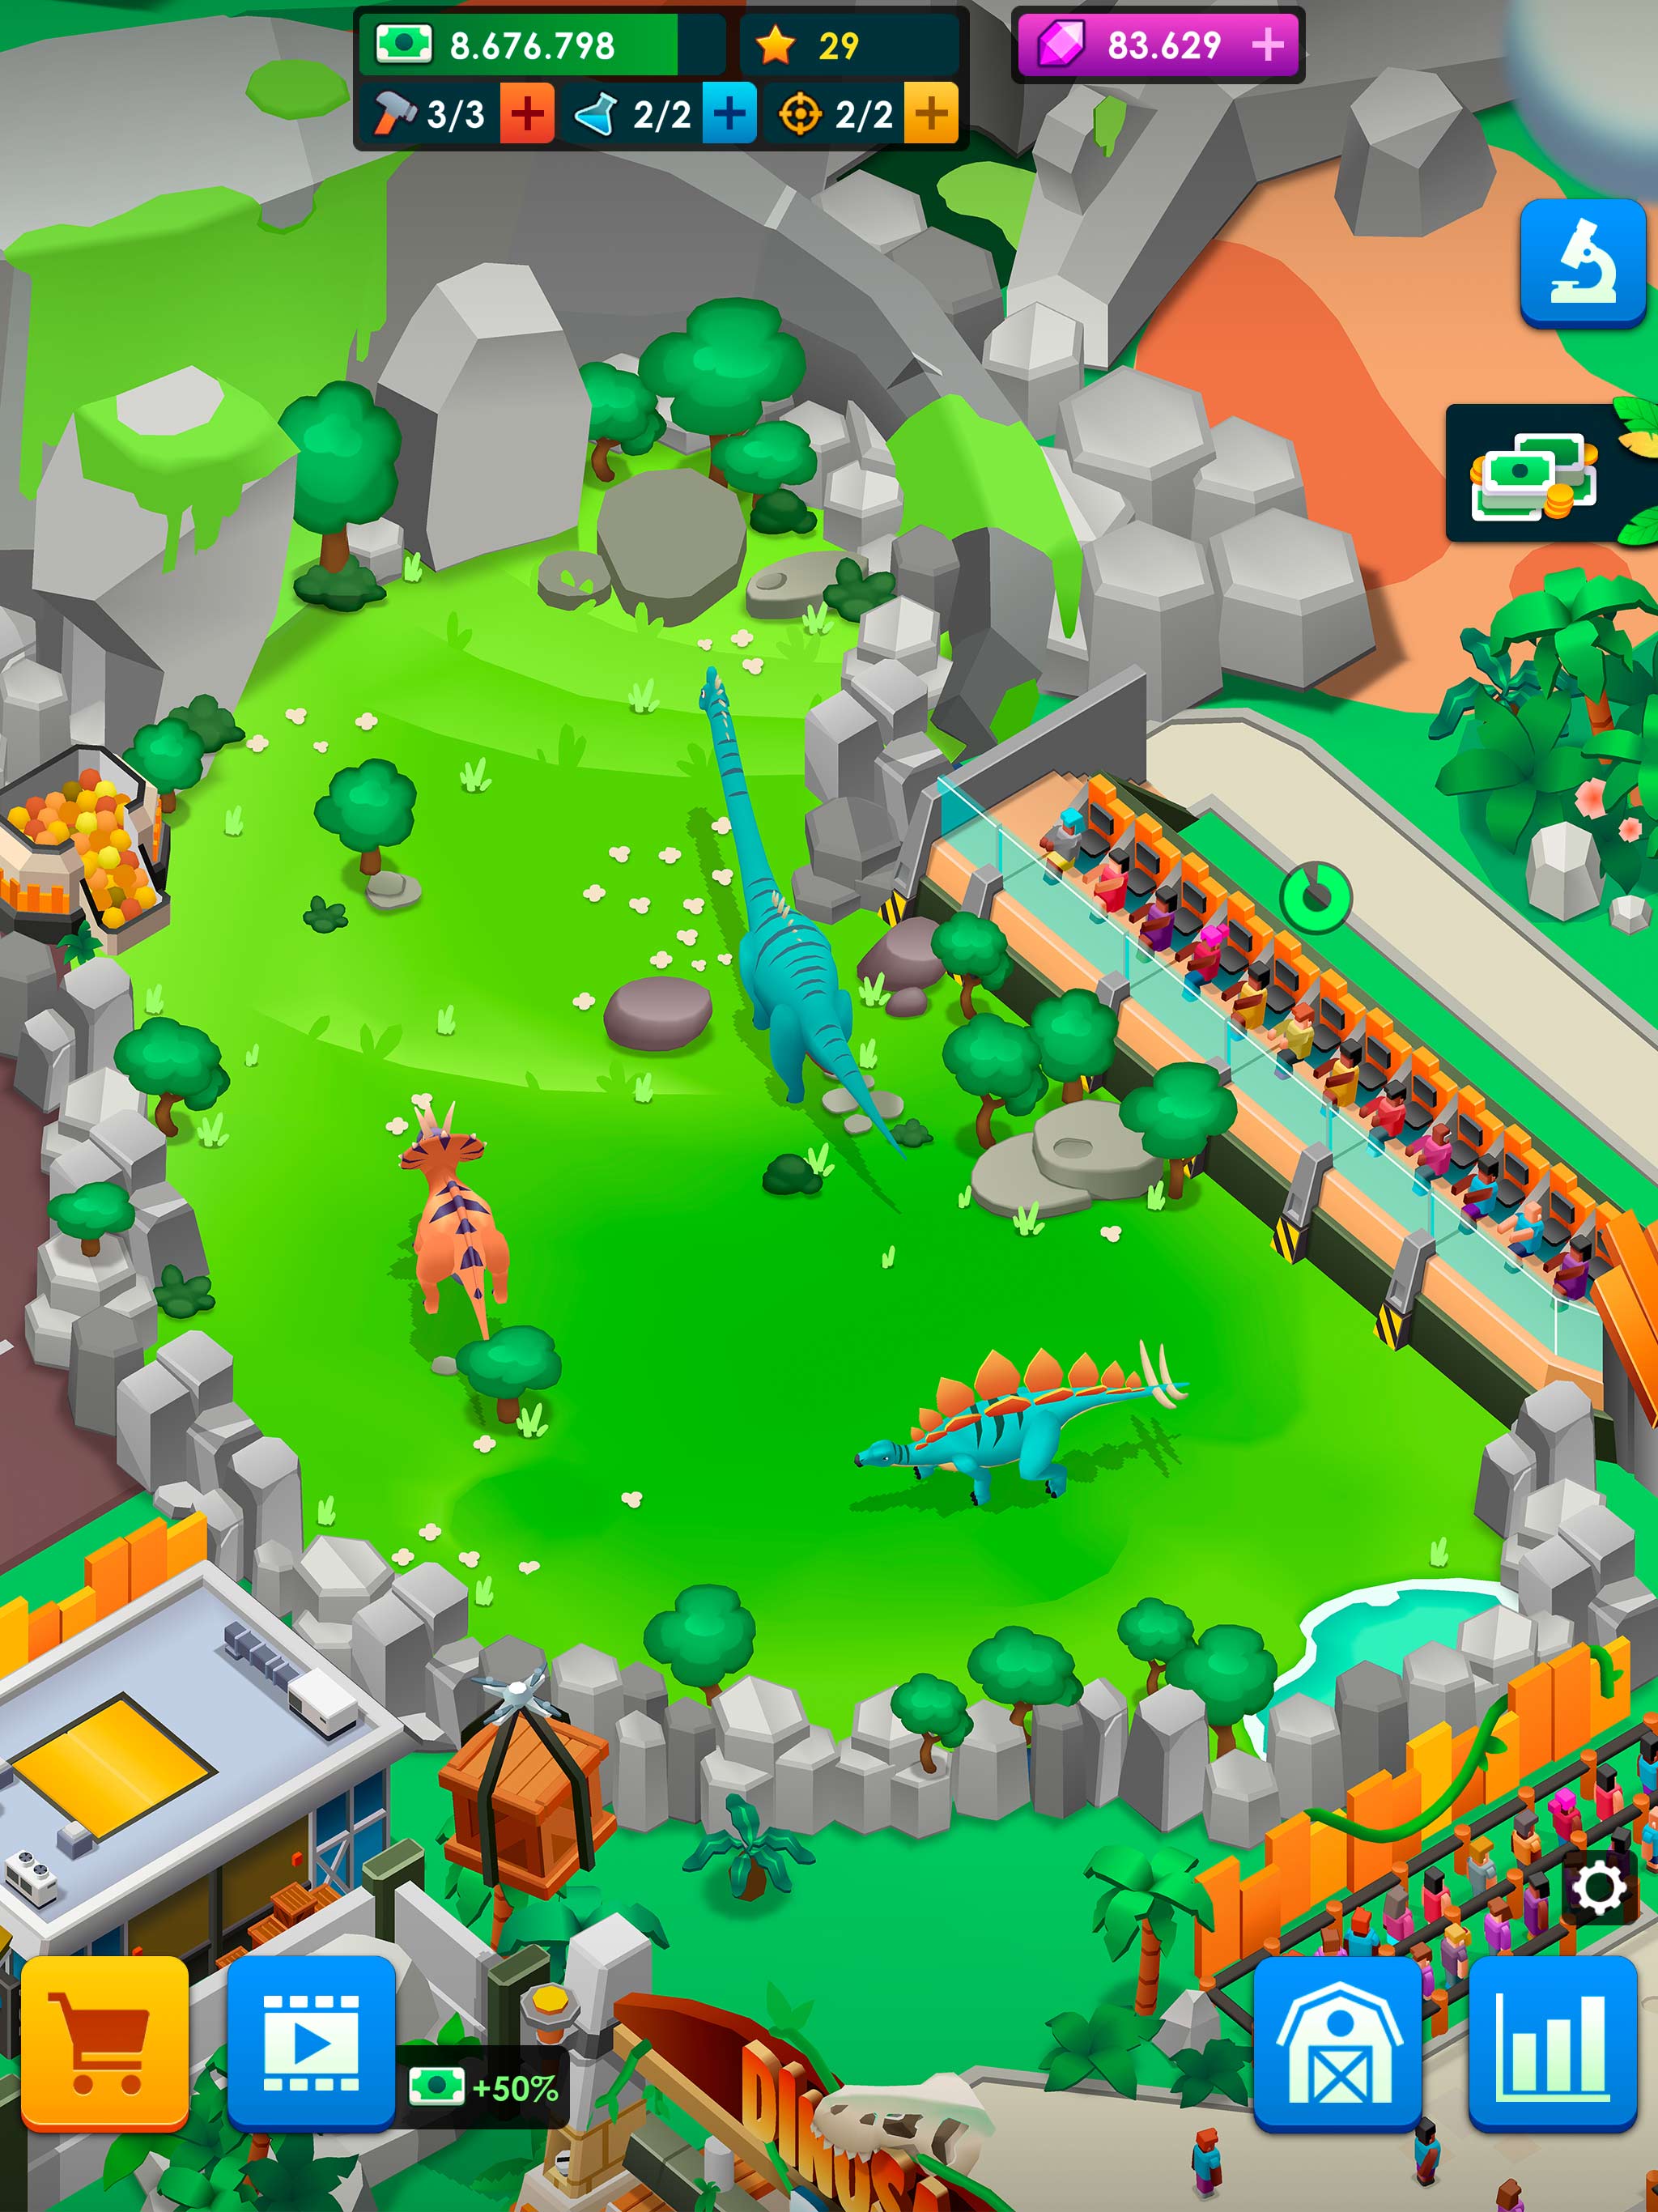 Download & Play Idle Theme Park Tycoon on PC & Mac (Emulator)